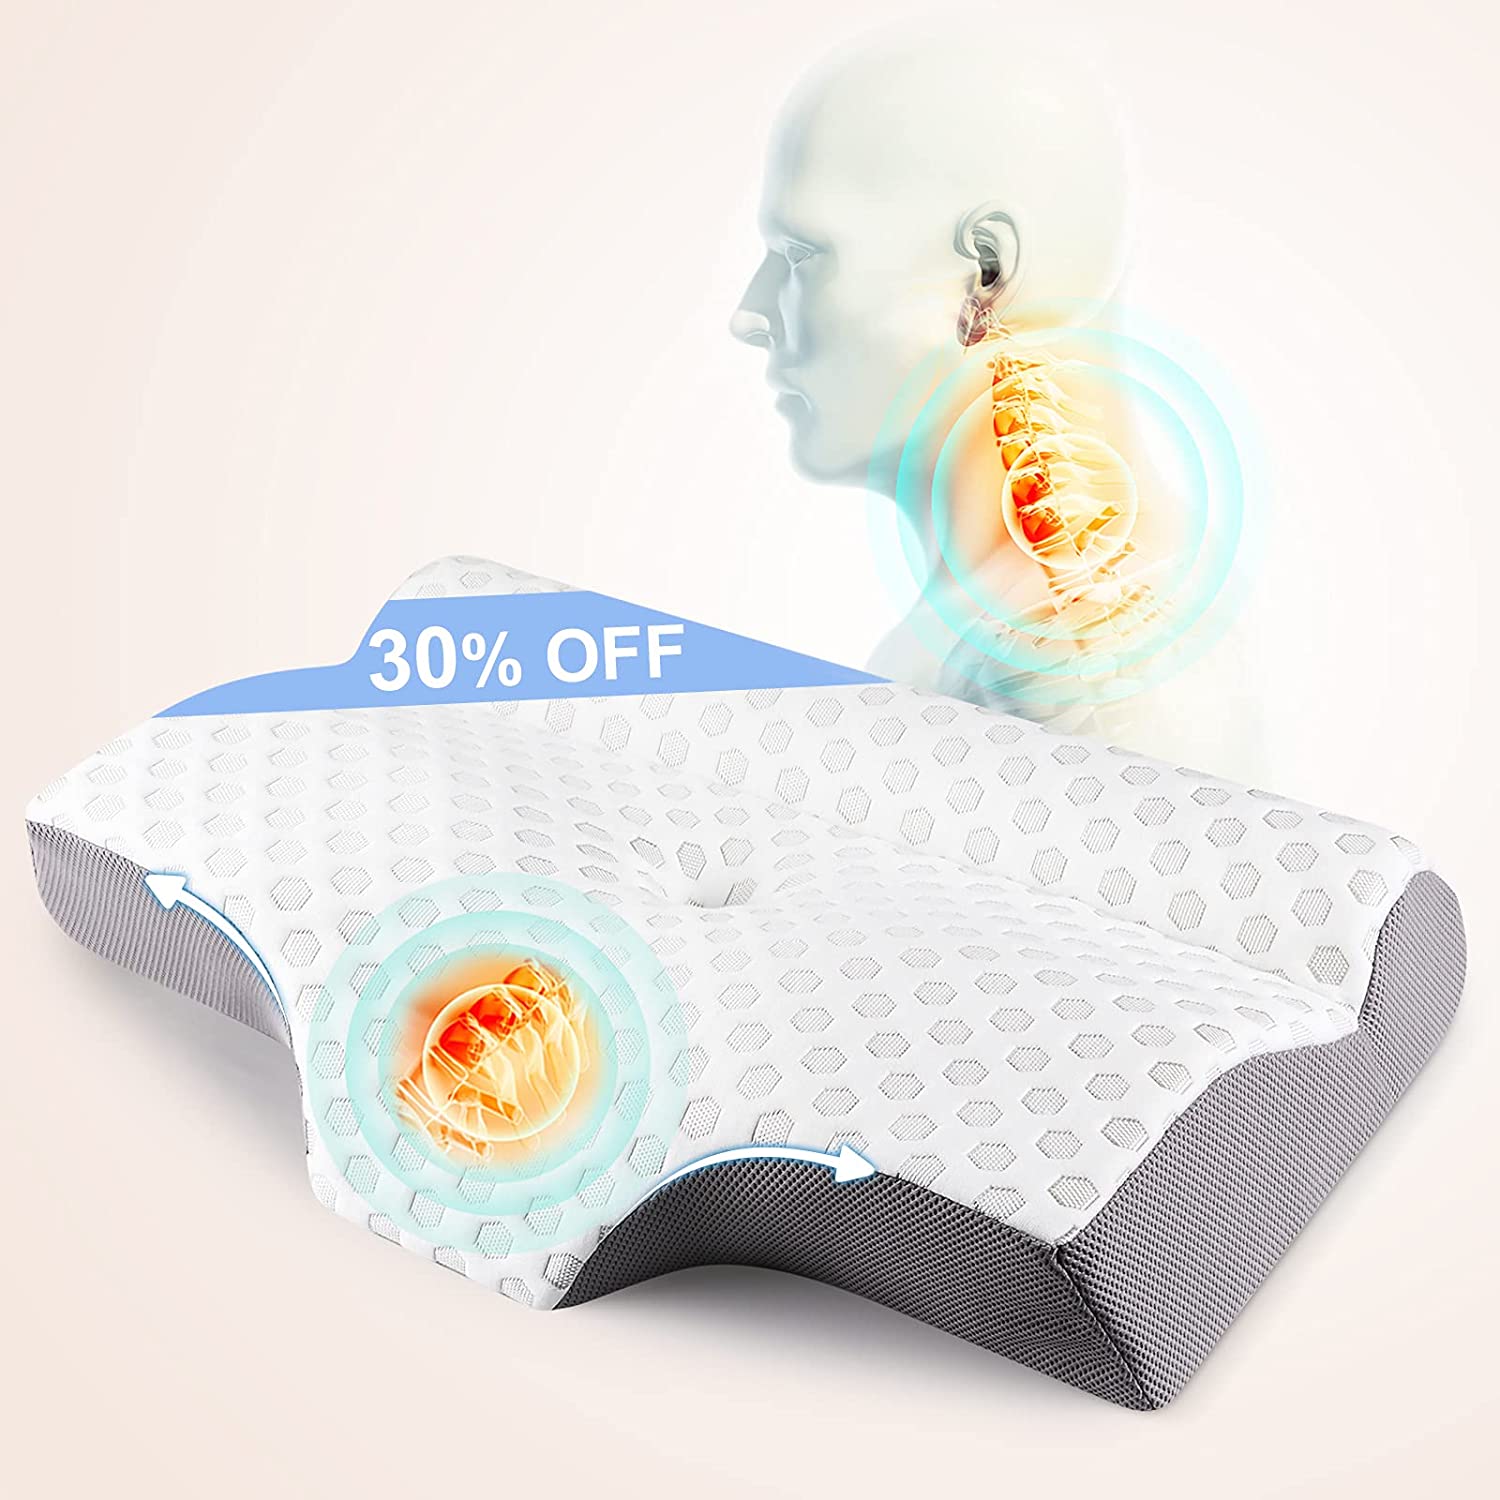 Cervical Pillow for Neck Pain Relief, Mkicesky 2 in 1 Neck Support Pil